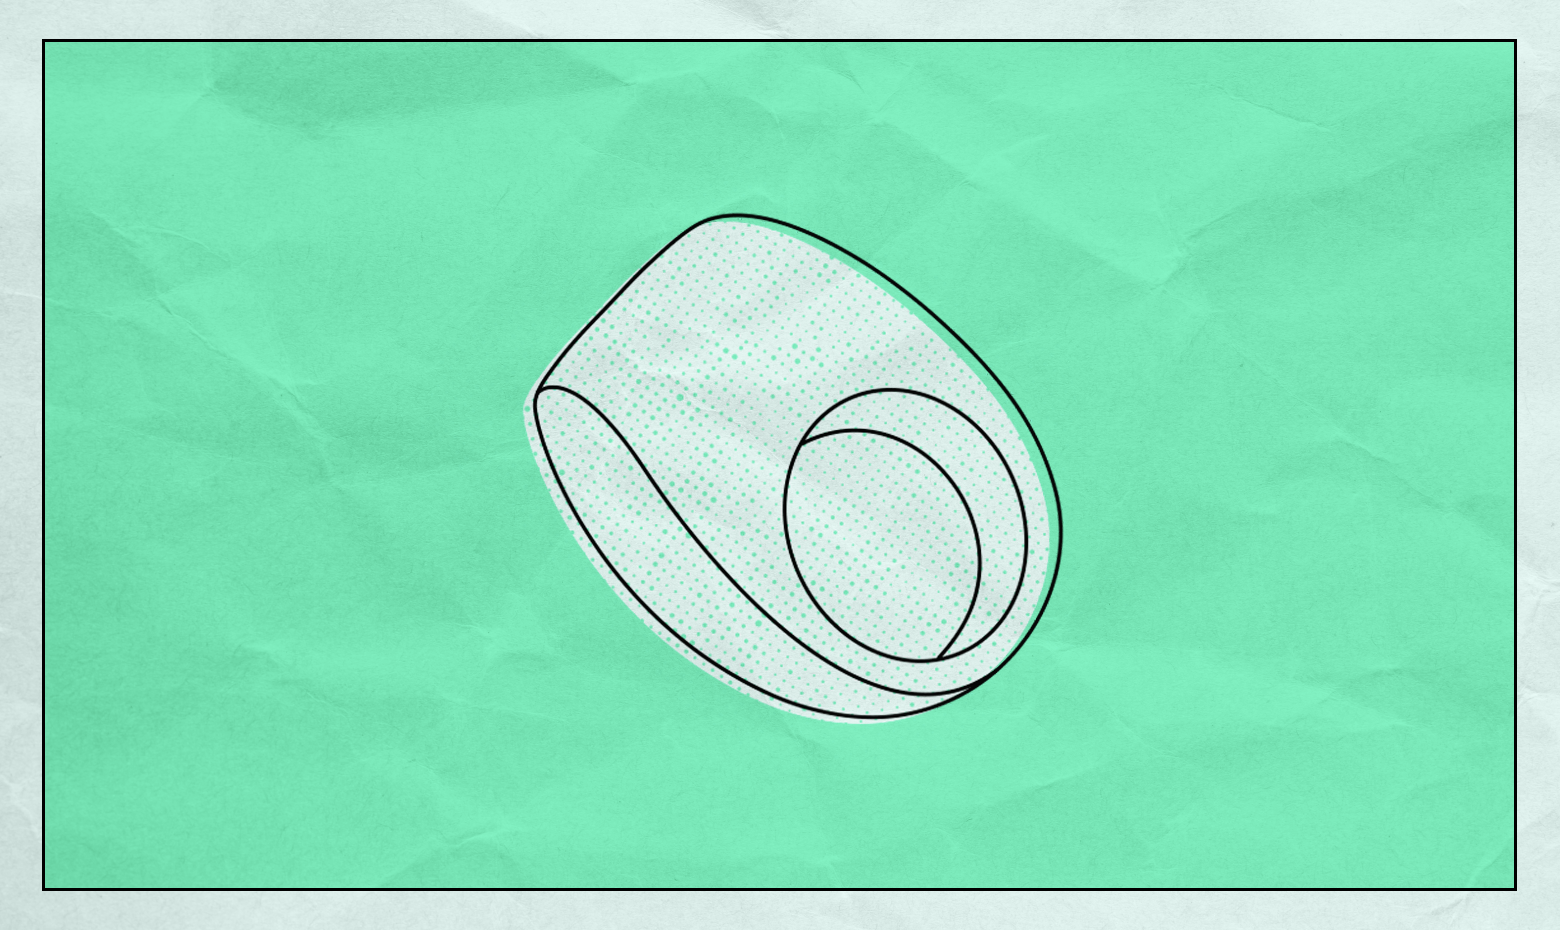 A flat-top ring illustration